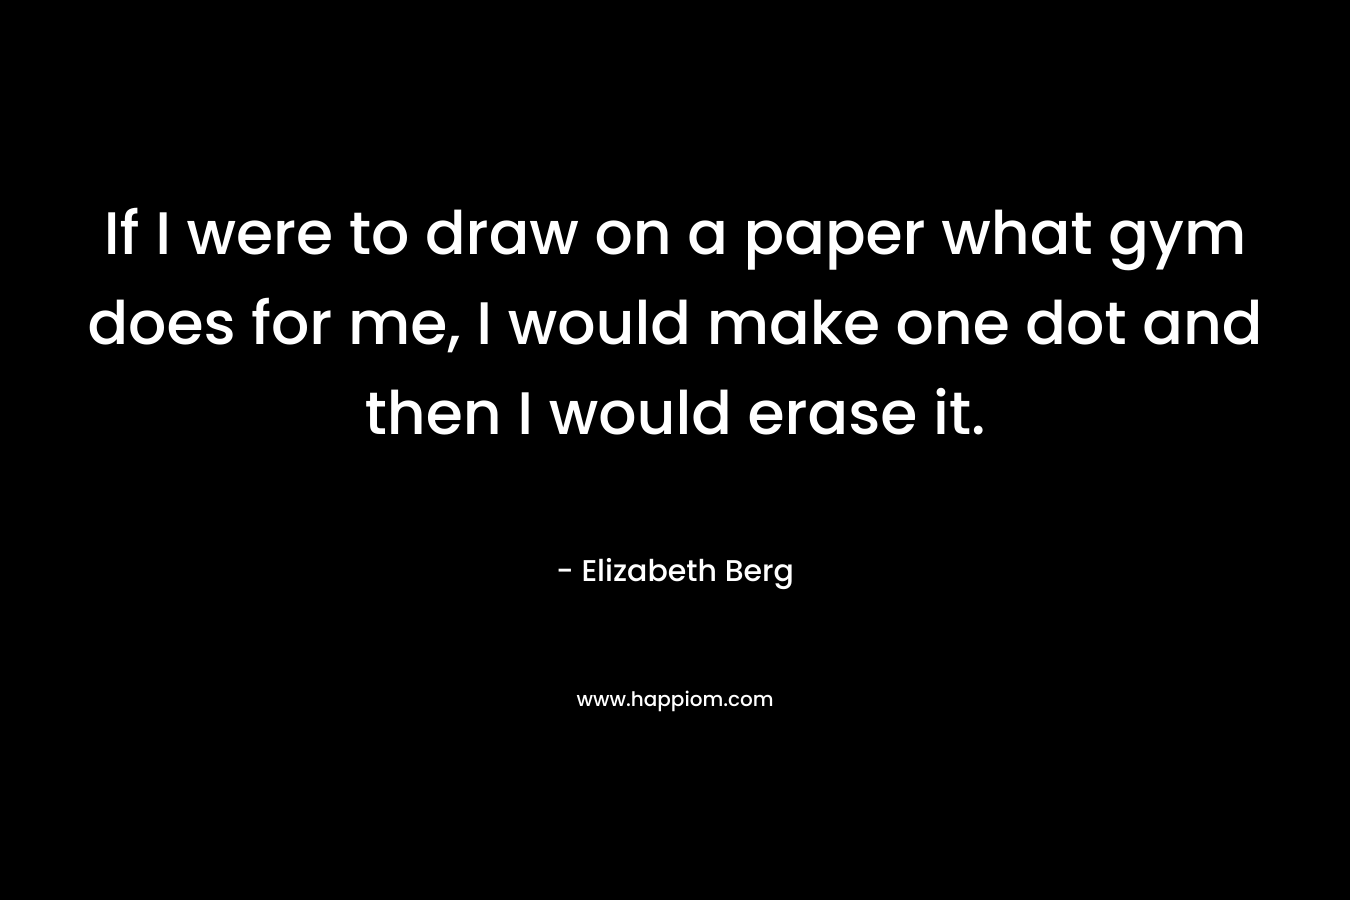 If I were to draw on a paper what gym does for me, I would make one dot and then I would erase it. – Elizabeth Berg